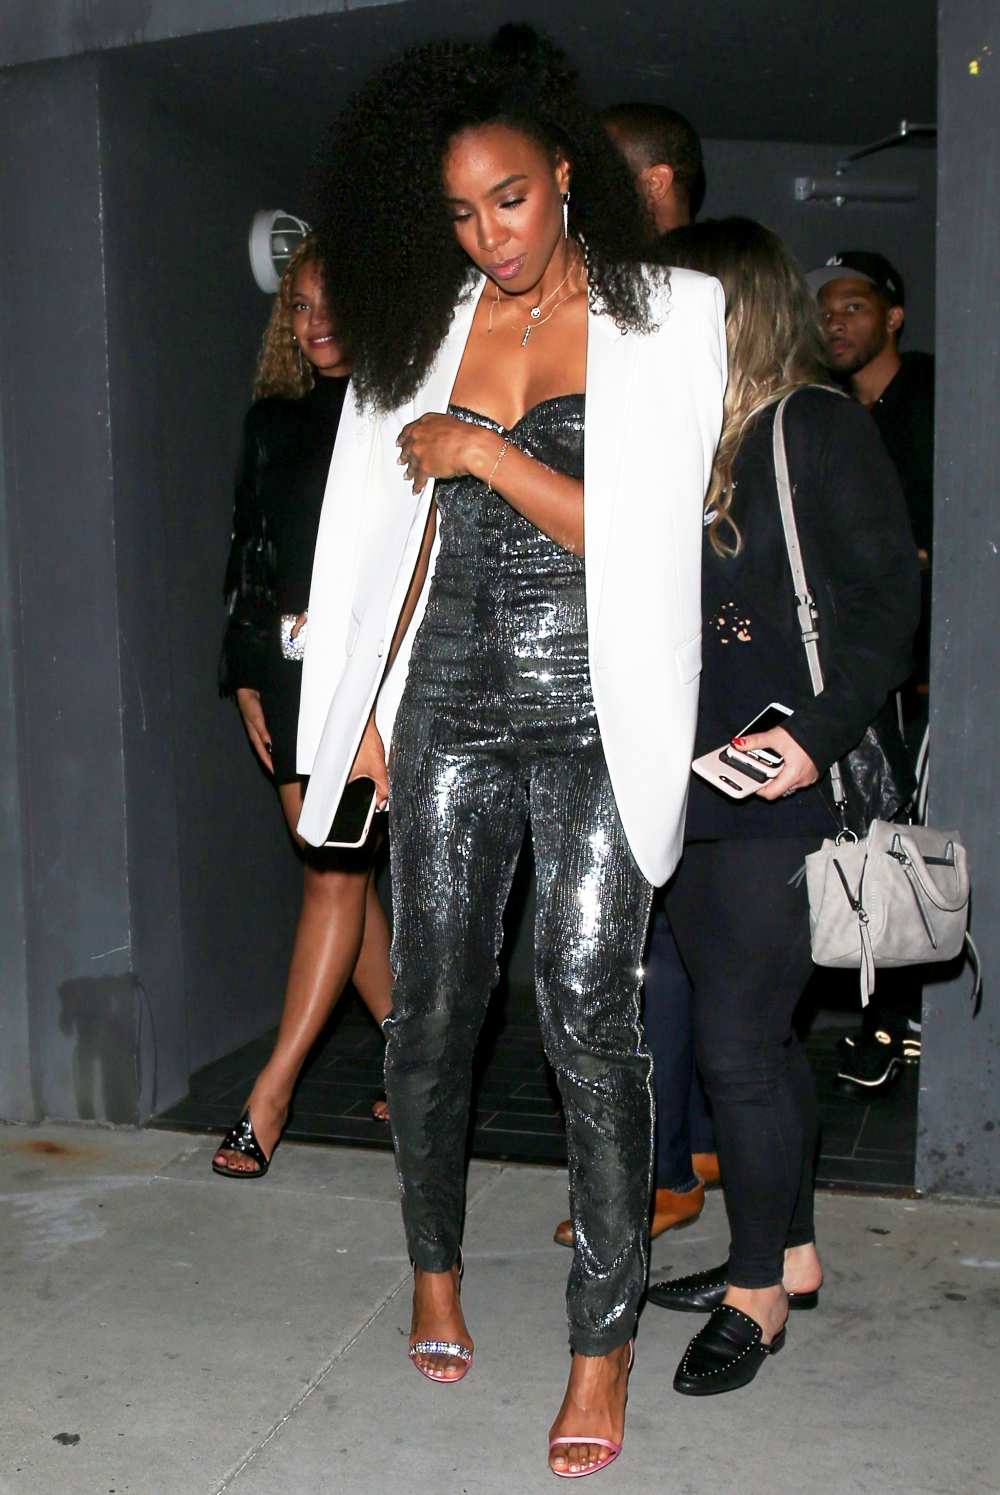 Kelly Rowland steps out on April 24, 2018 in West Hollywood, California.